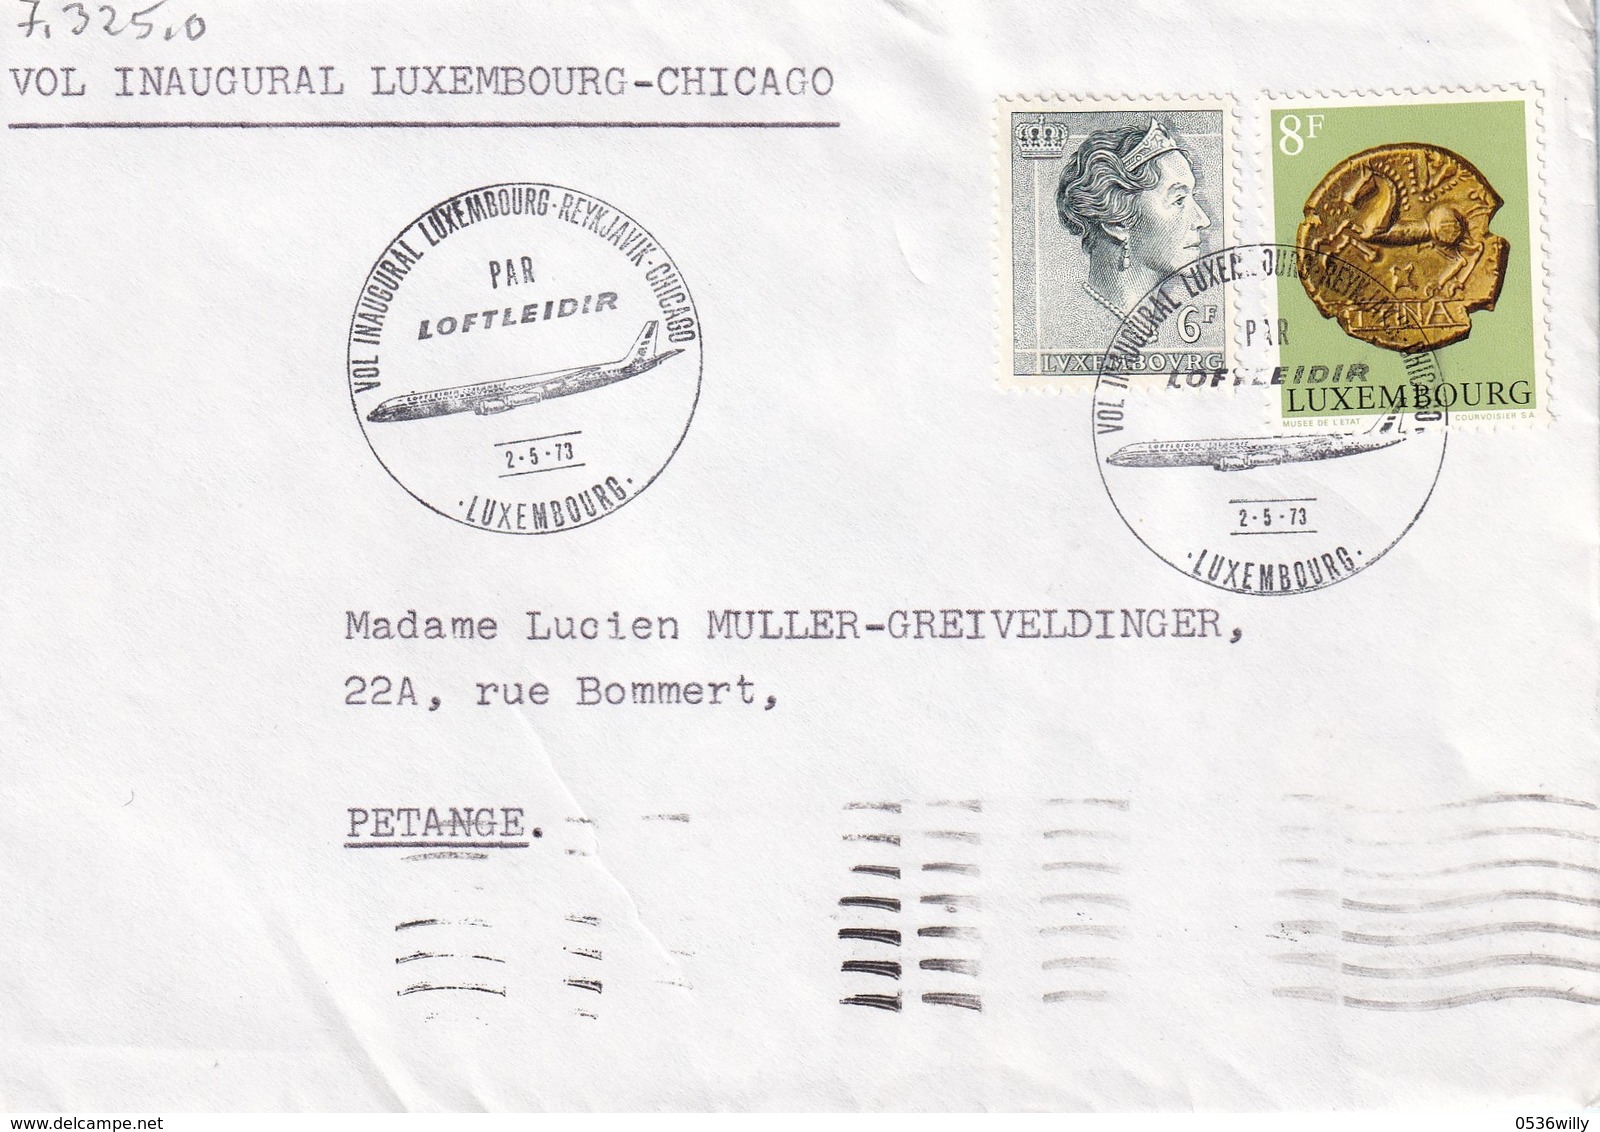 Luxembourg 1973. Vol Inaugural Luxembourg-Chicago (7.325.0) - Cartas & Documentos